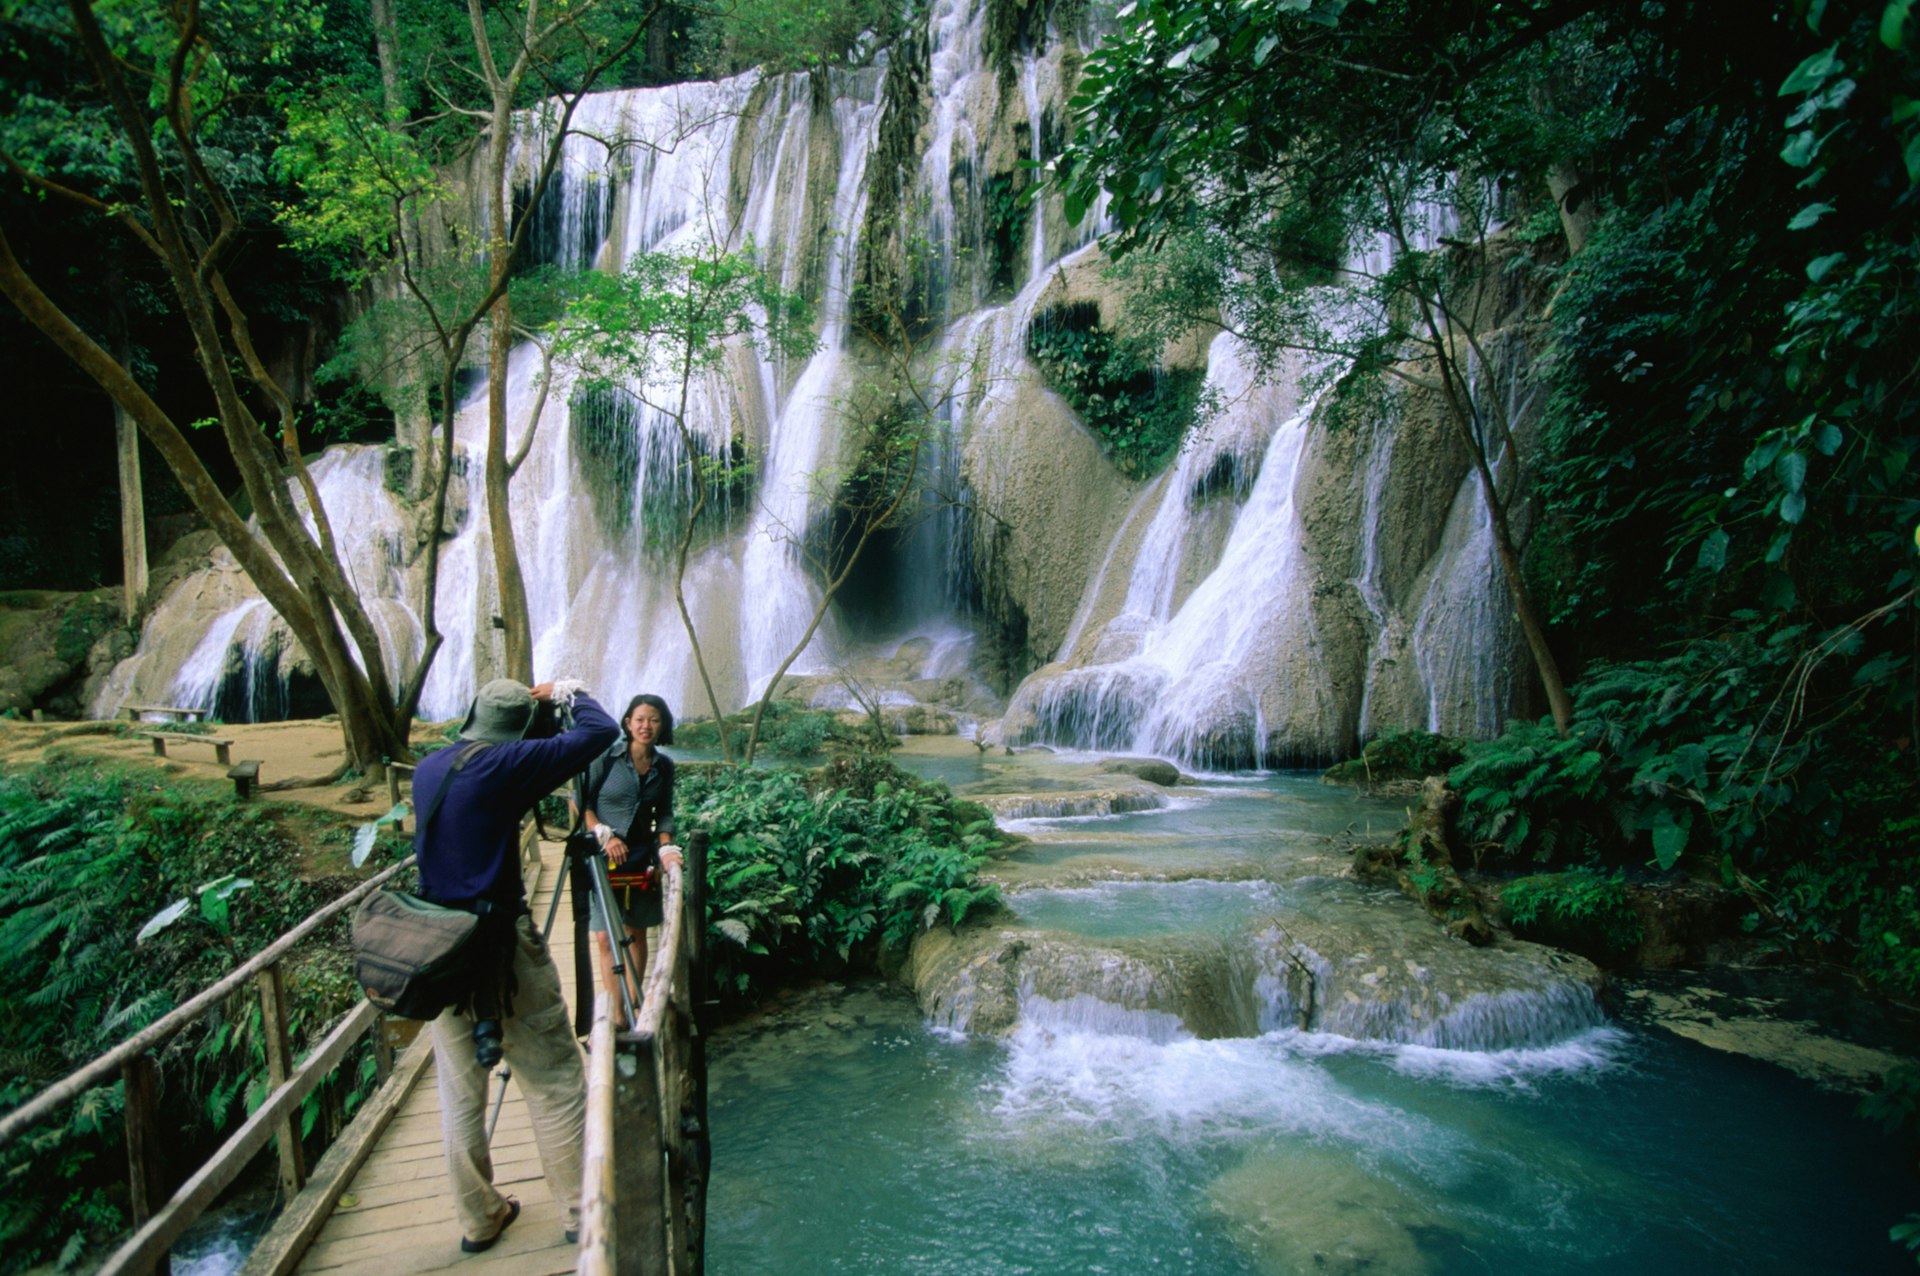 A man takes a photo of his wife in front of some waterfalls at Luang Prabang, Luang Prabang, Laos, South-East Asia